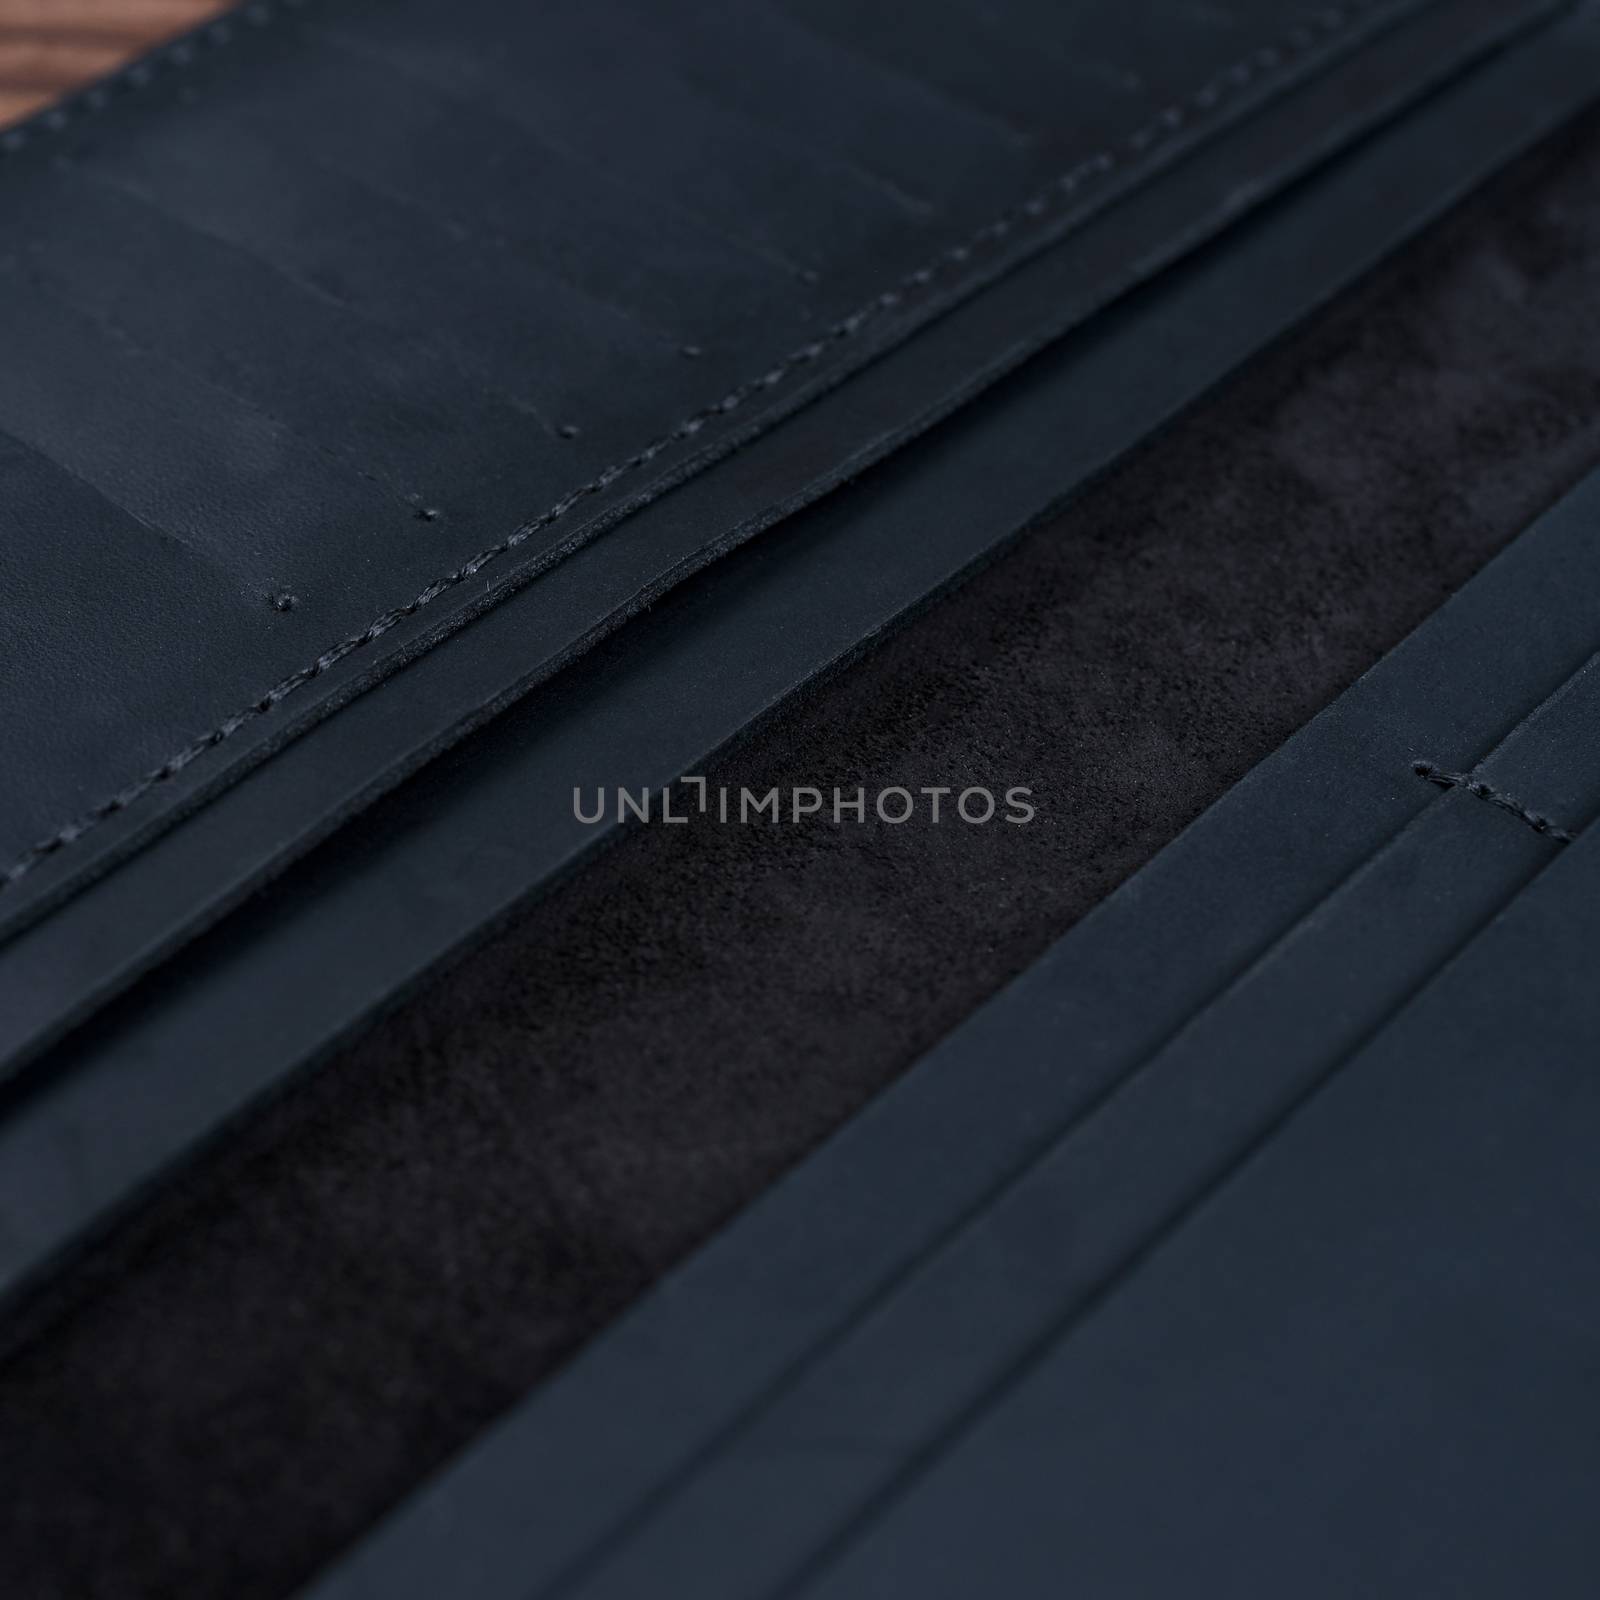 Part of handmade black travel wallet lies on textured wooden backgroud closeup. Wallet is open and empty. Side view. Stock photo of businessman accessories.